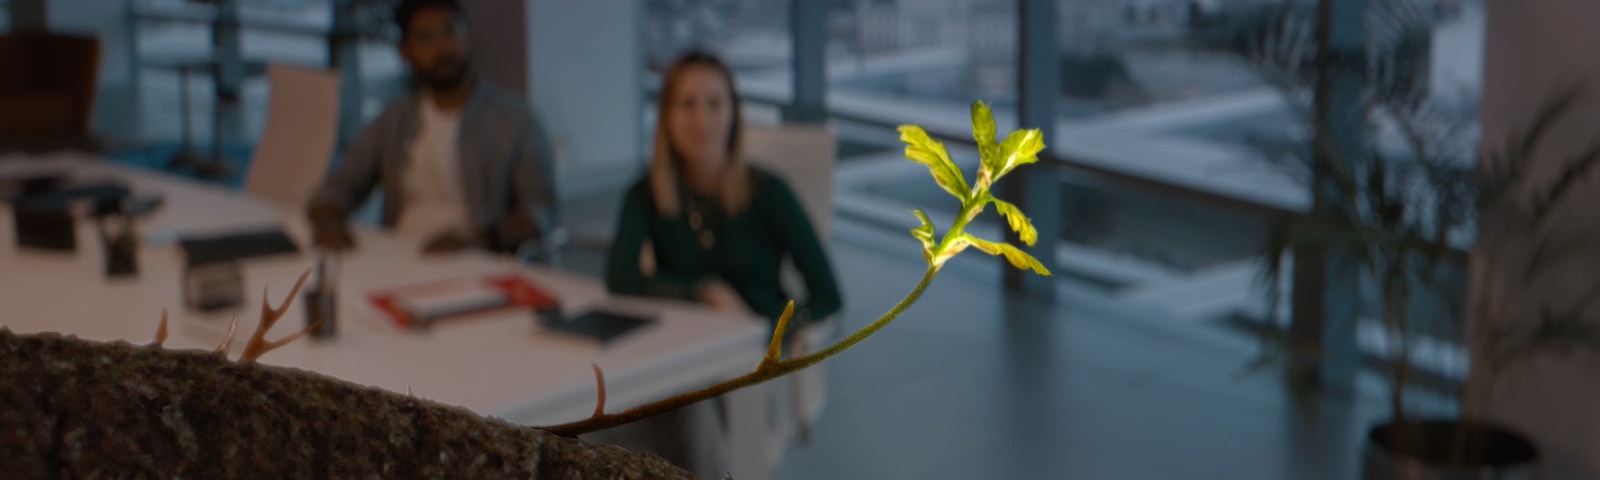 Tree leaf sprouting in a conference room